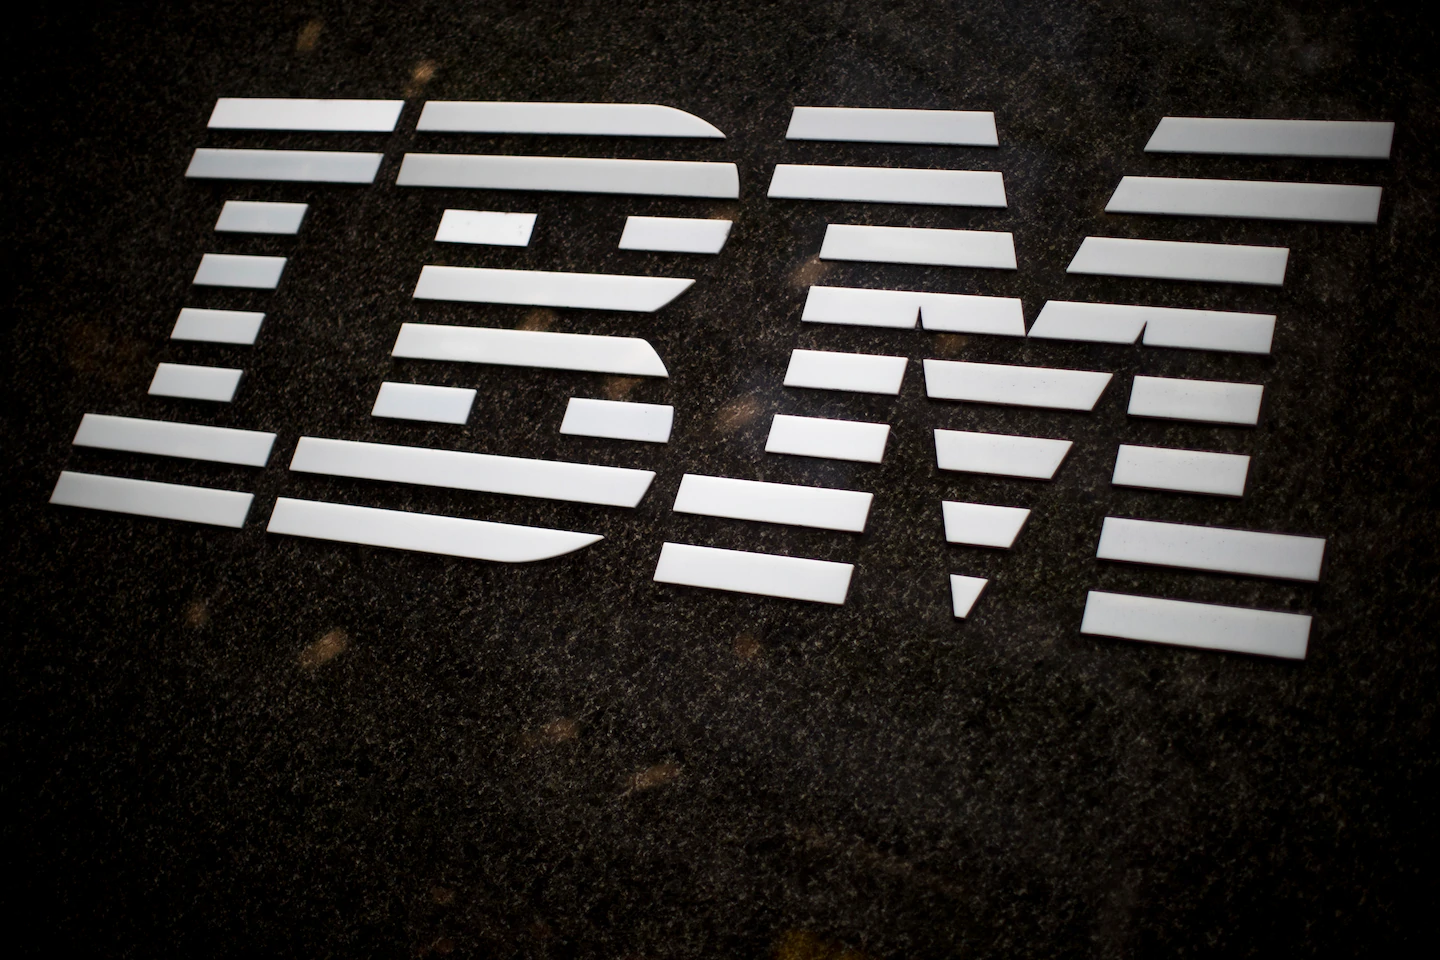 IBM’s decision to abandon facial recognition technology fueled by years of debate